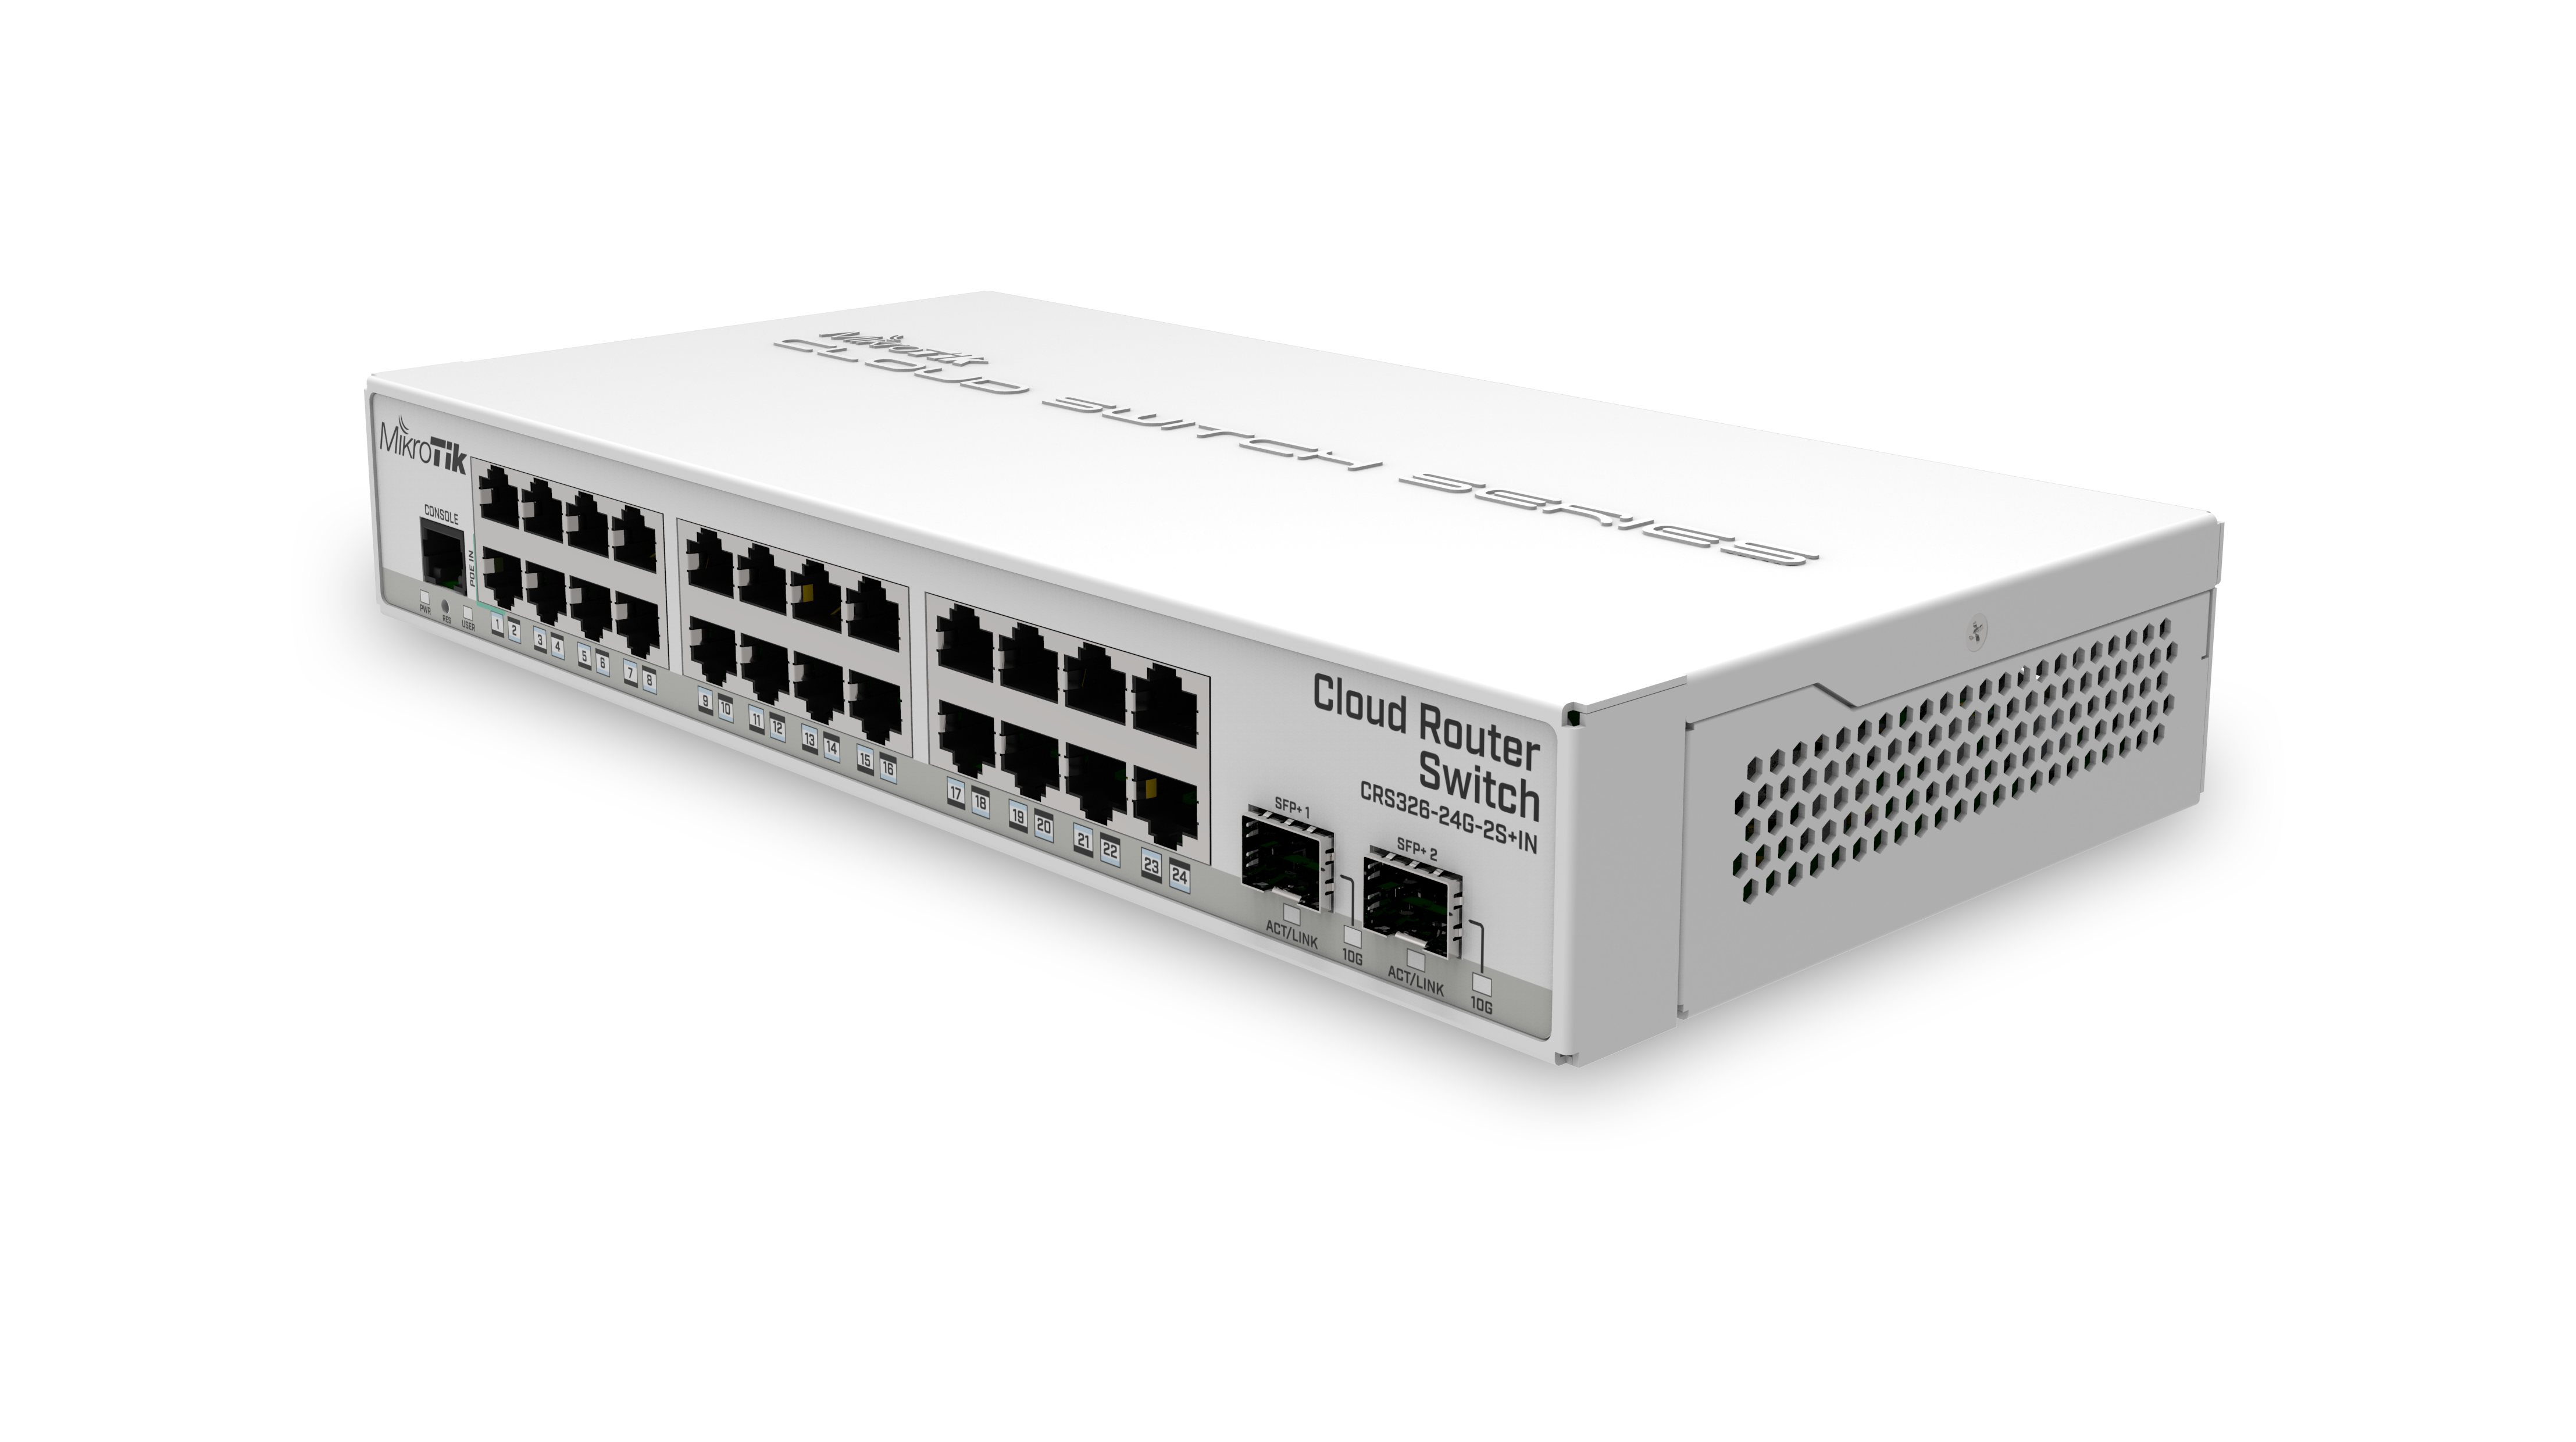 MikroTik Cloud Router Ethernet Switches CRS326-24G-2S+IN (front view)